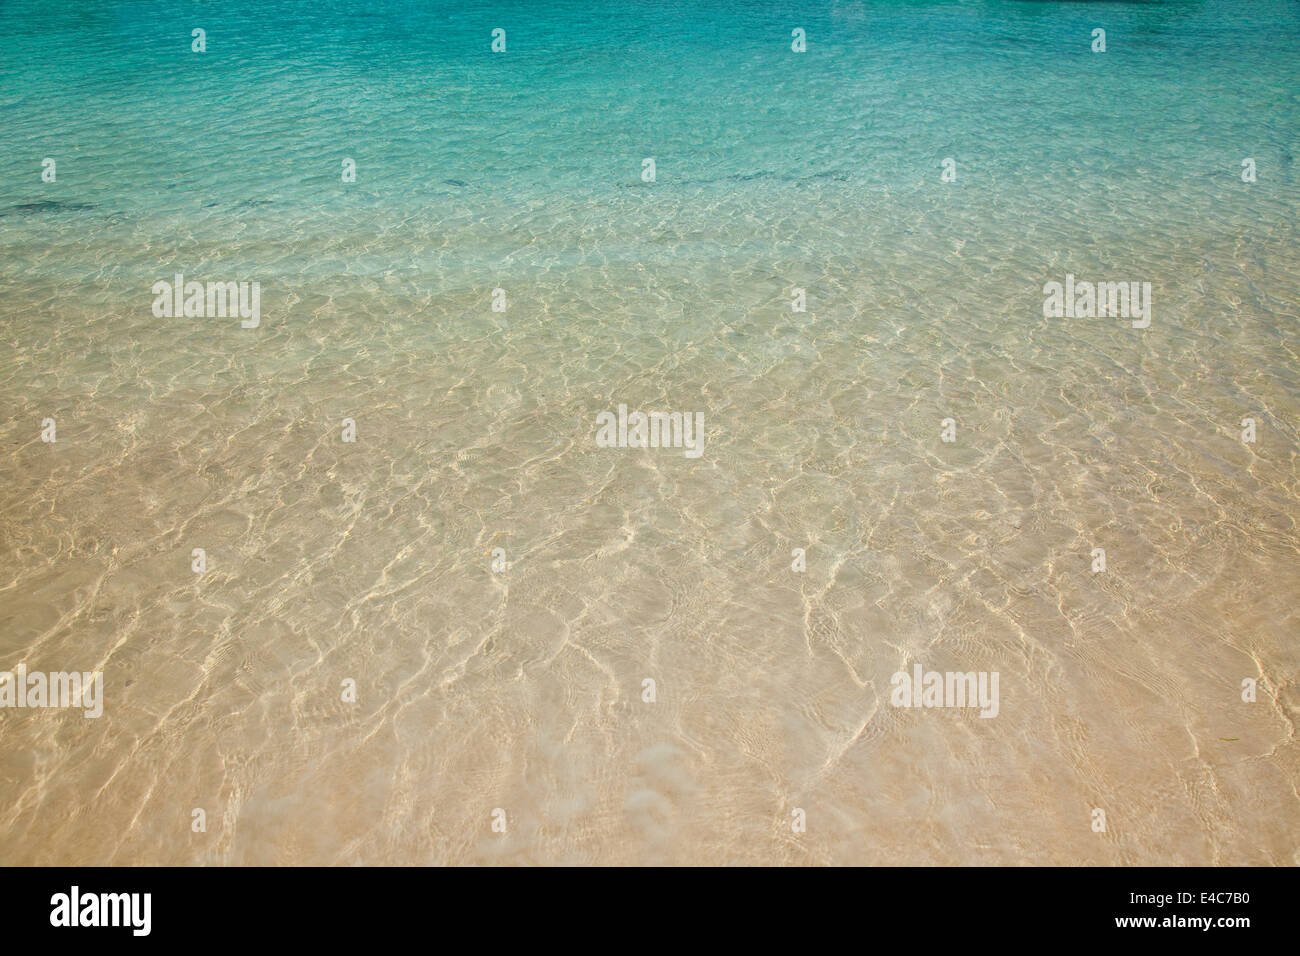 Crystal clear watersurface at the beach Stock Photo